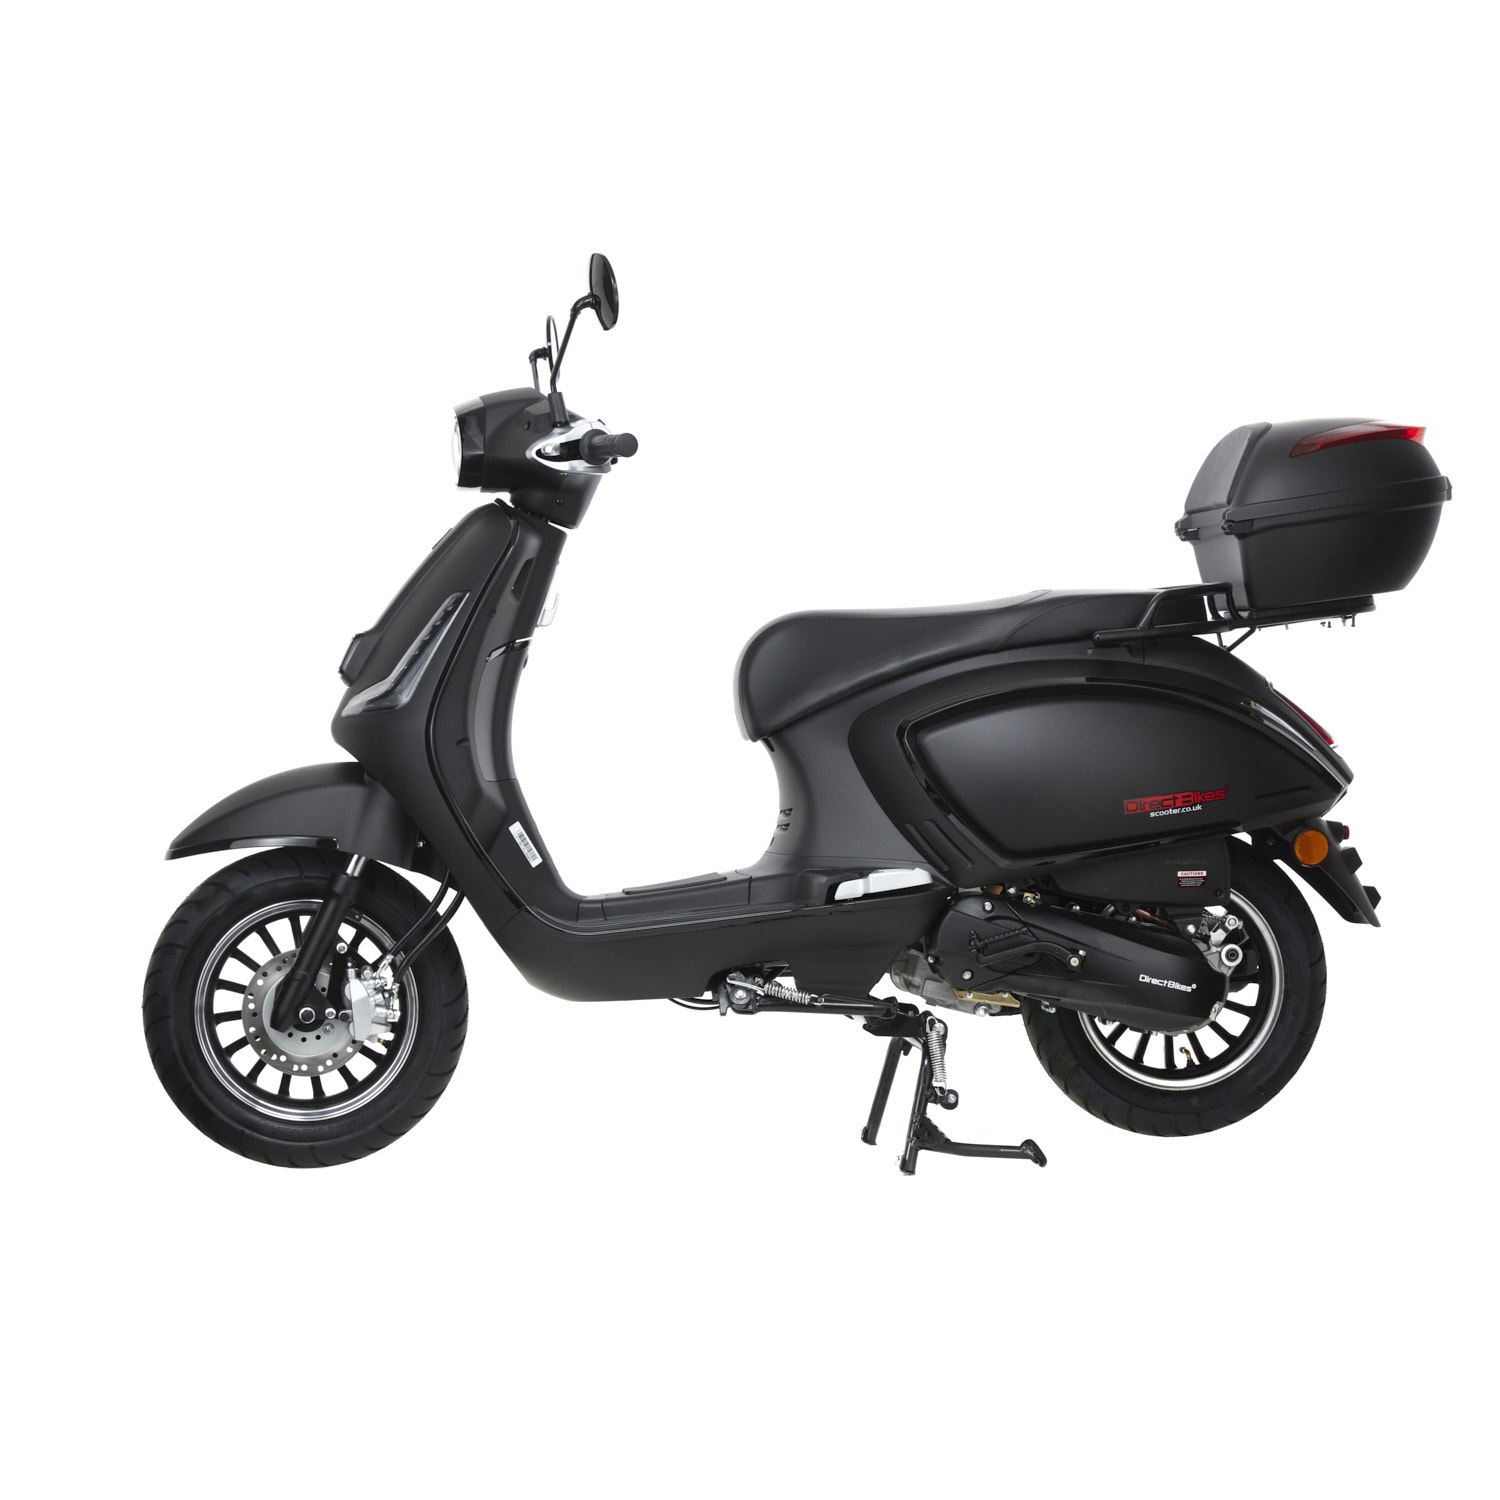 50cc Scooters  The Zoot Scooter Range Is The Ultimate Drive